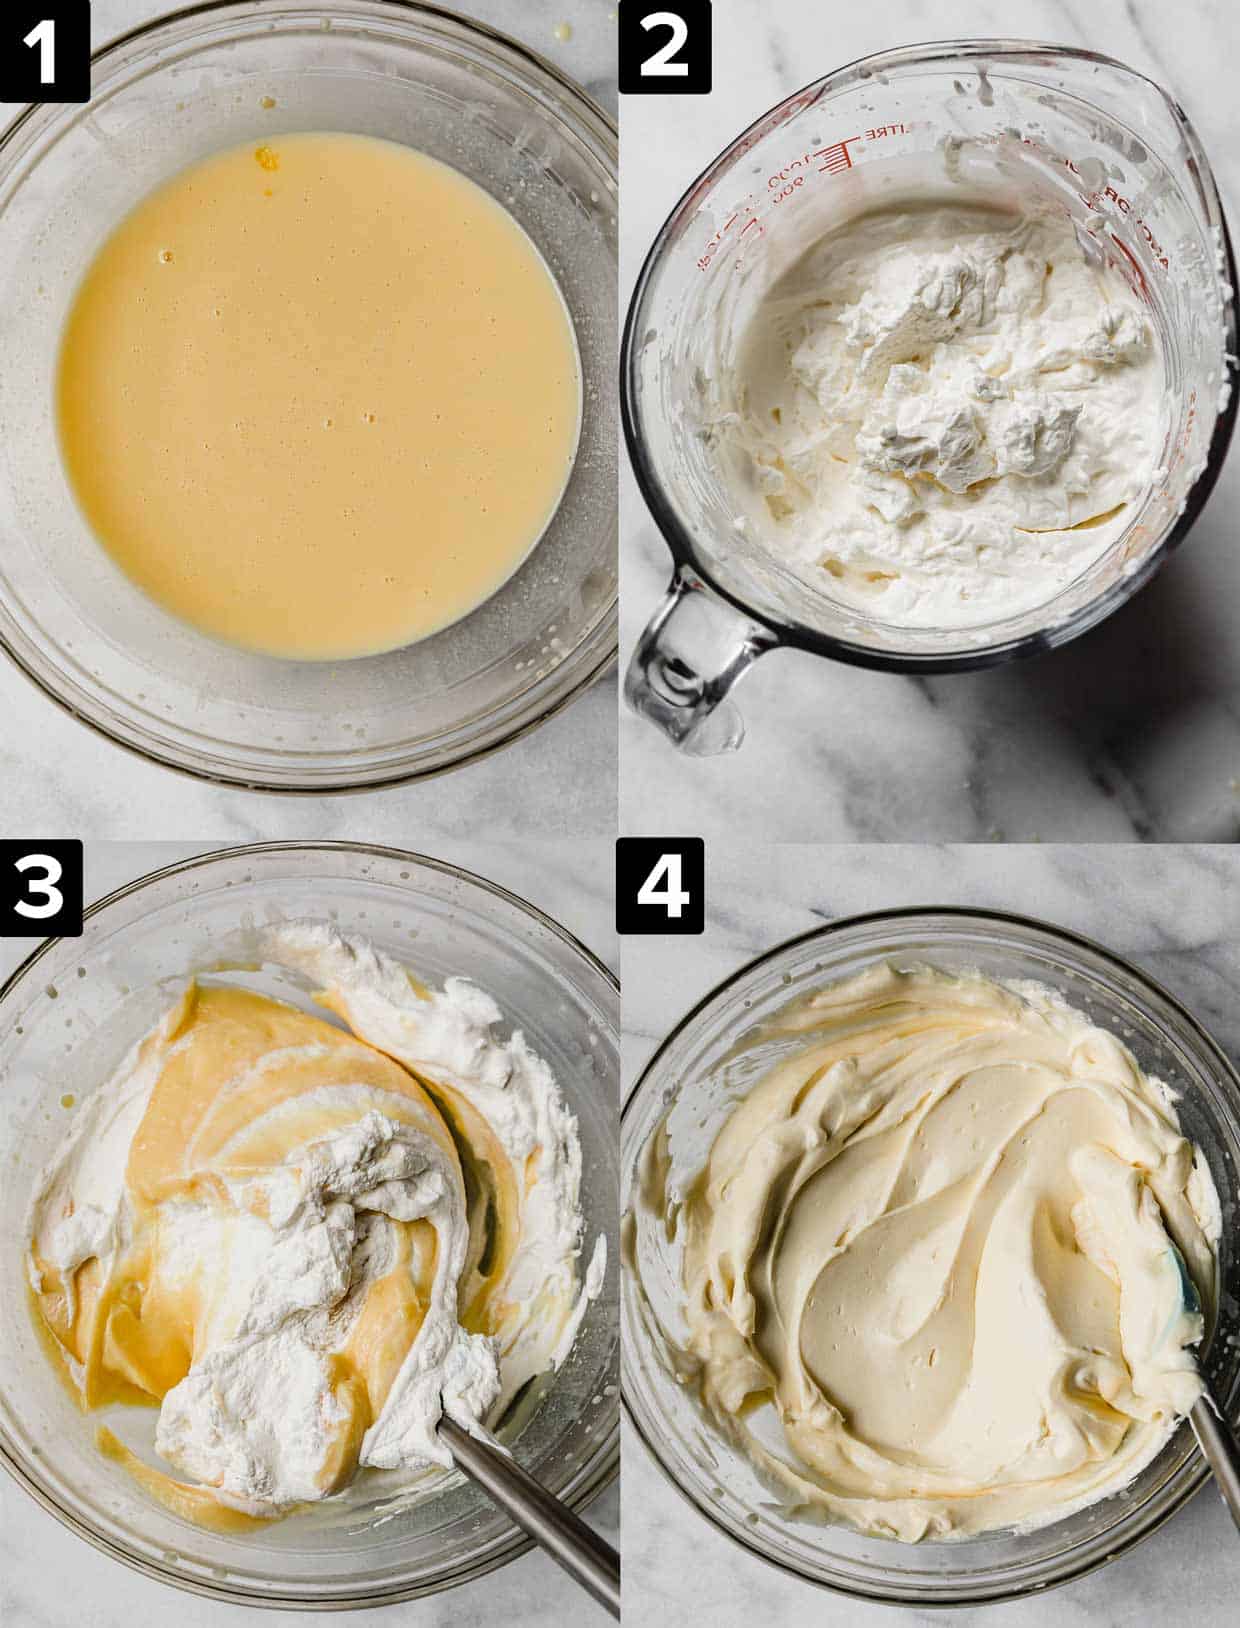 Four images showing how to make the Banana Cream Pie filling to top on cookies.